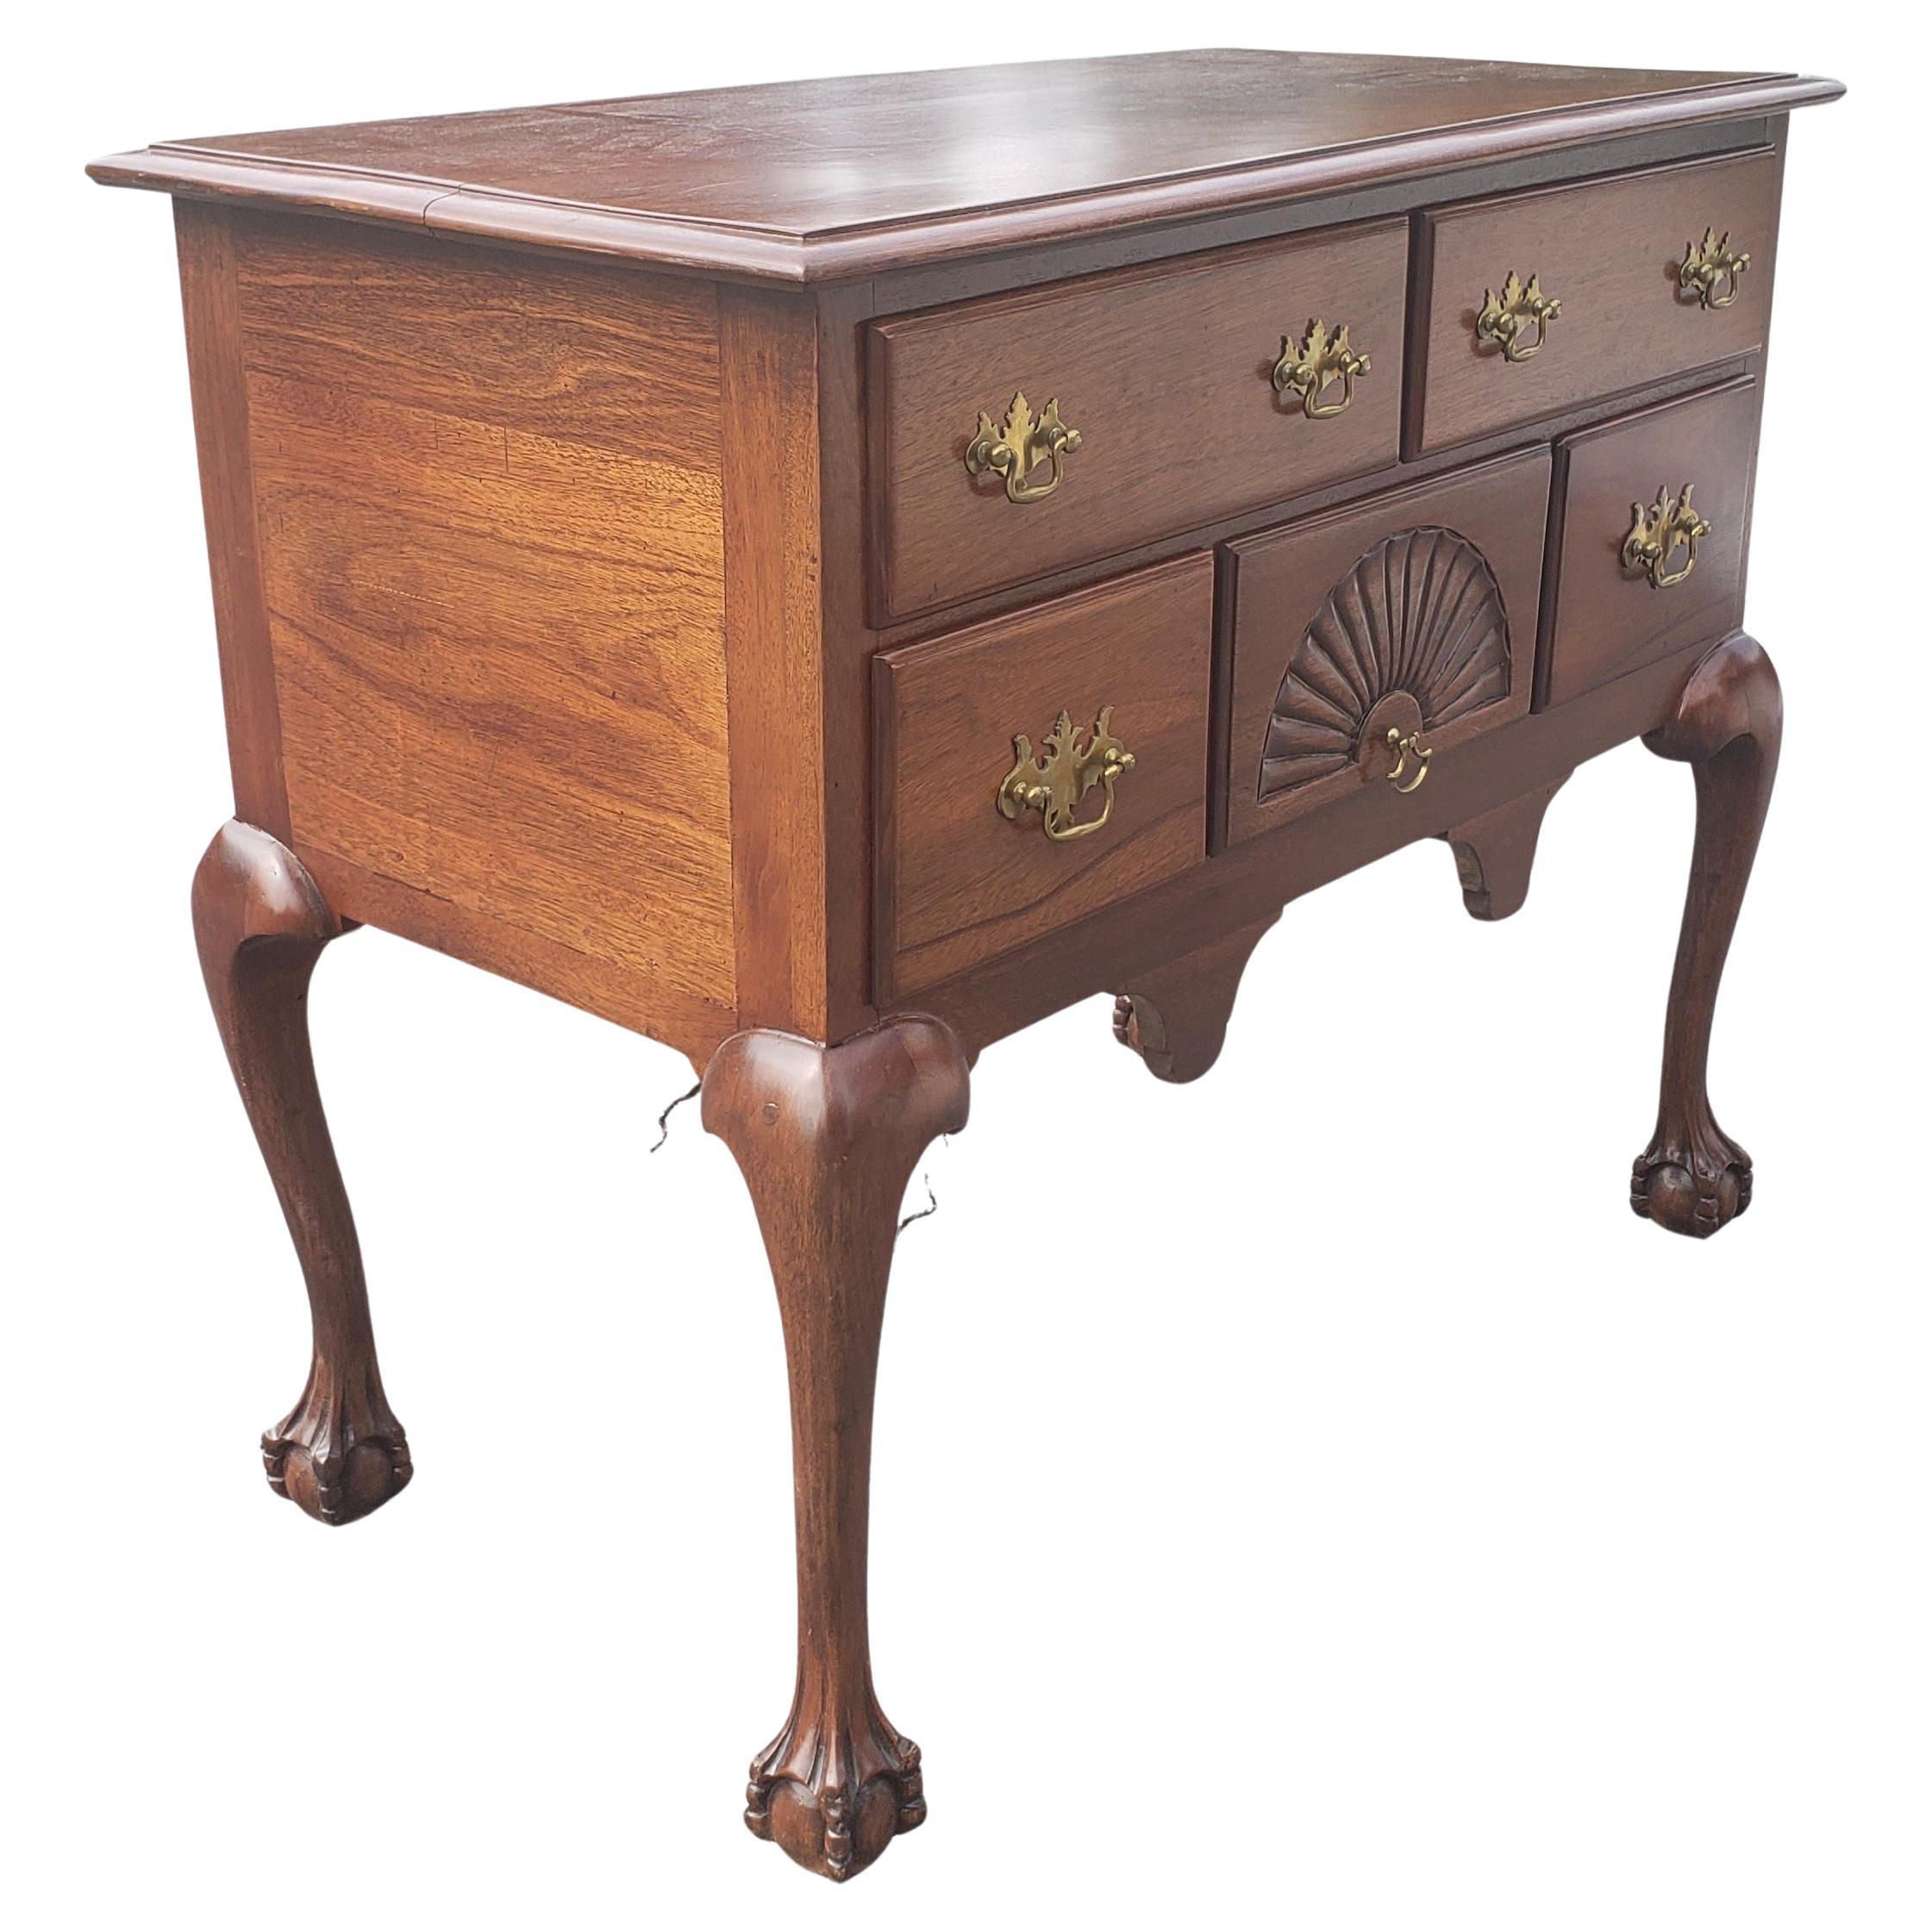 Late 19th Century Chippendale Mahogany Lowboy with Ball and Claw Feet For Sale 1